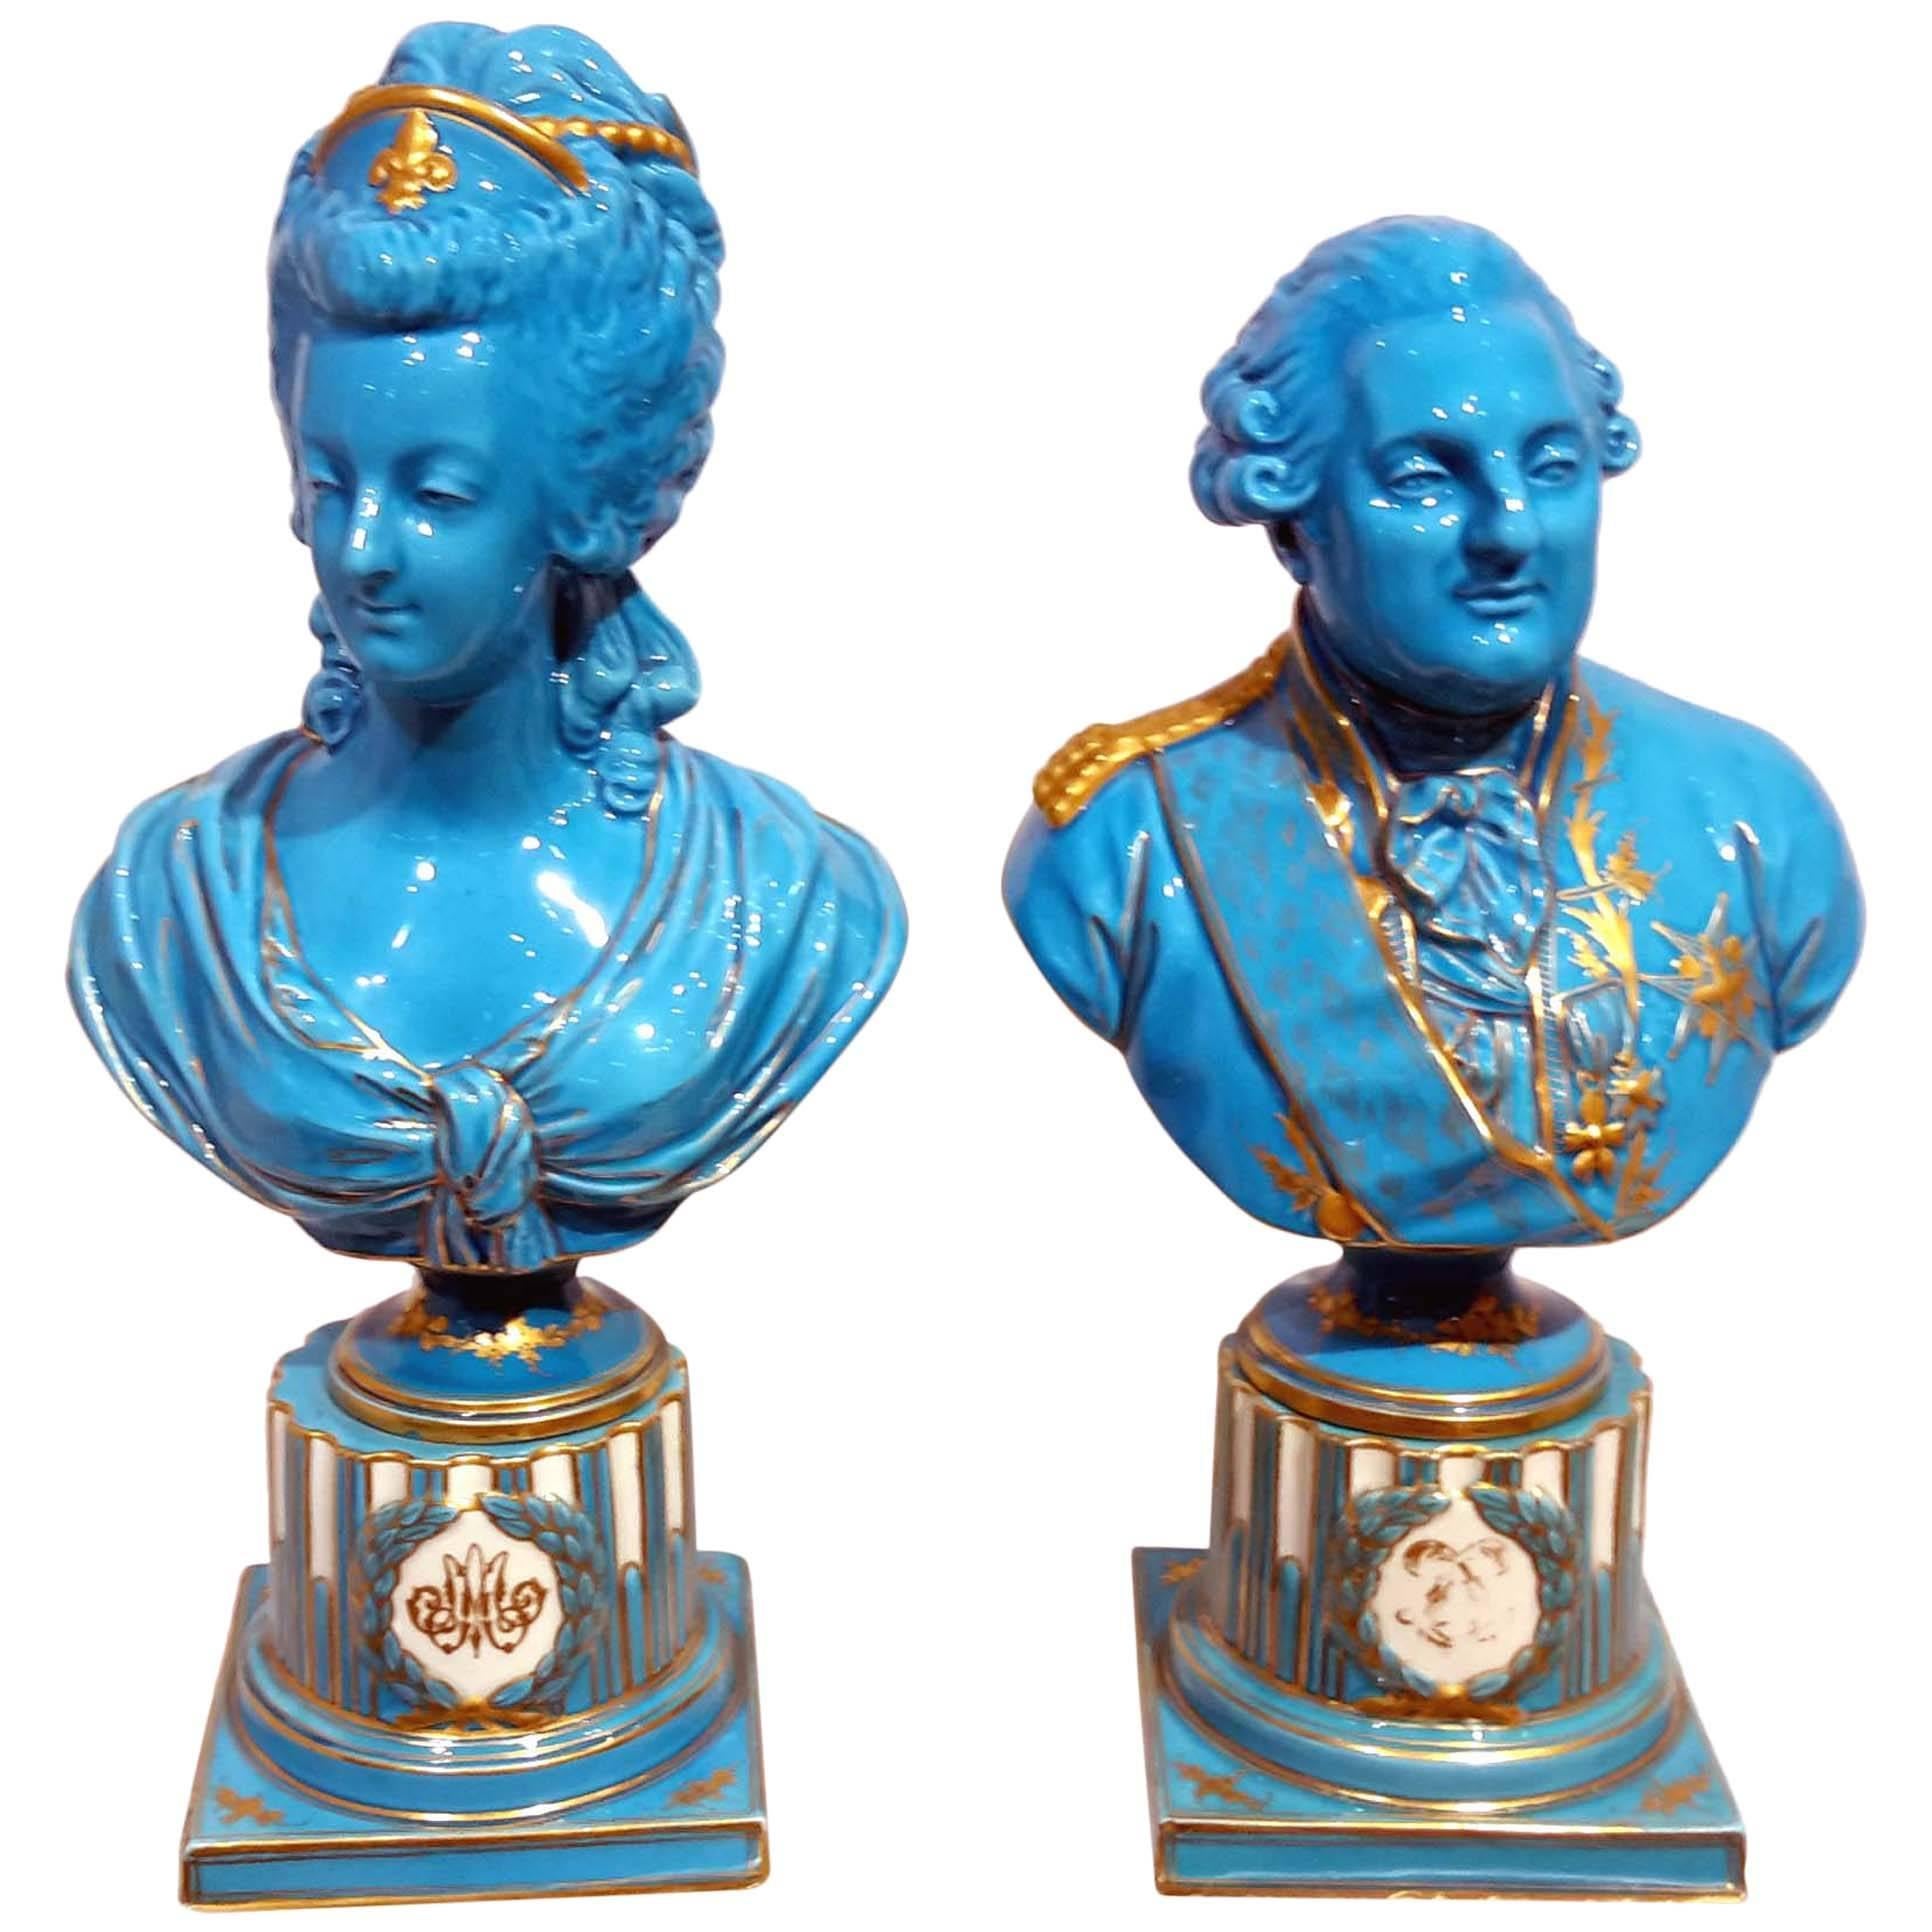 Pair of Sevres Porcelain Busts of Louis XVI and Marie Antoinette, 19th Century